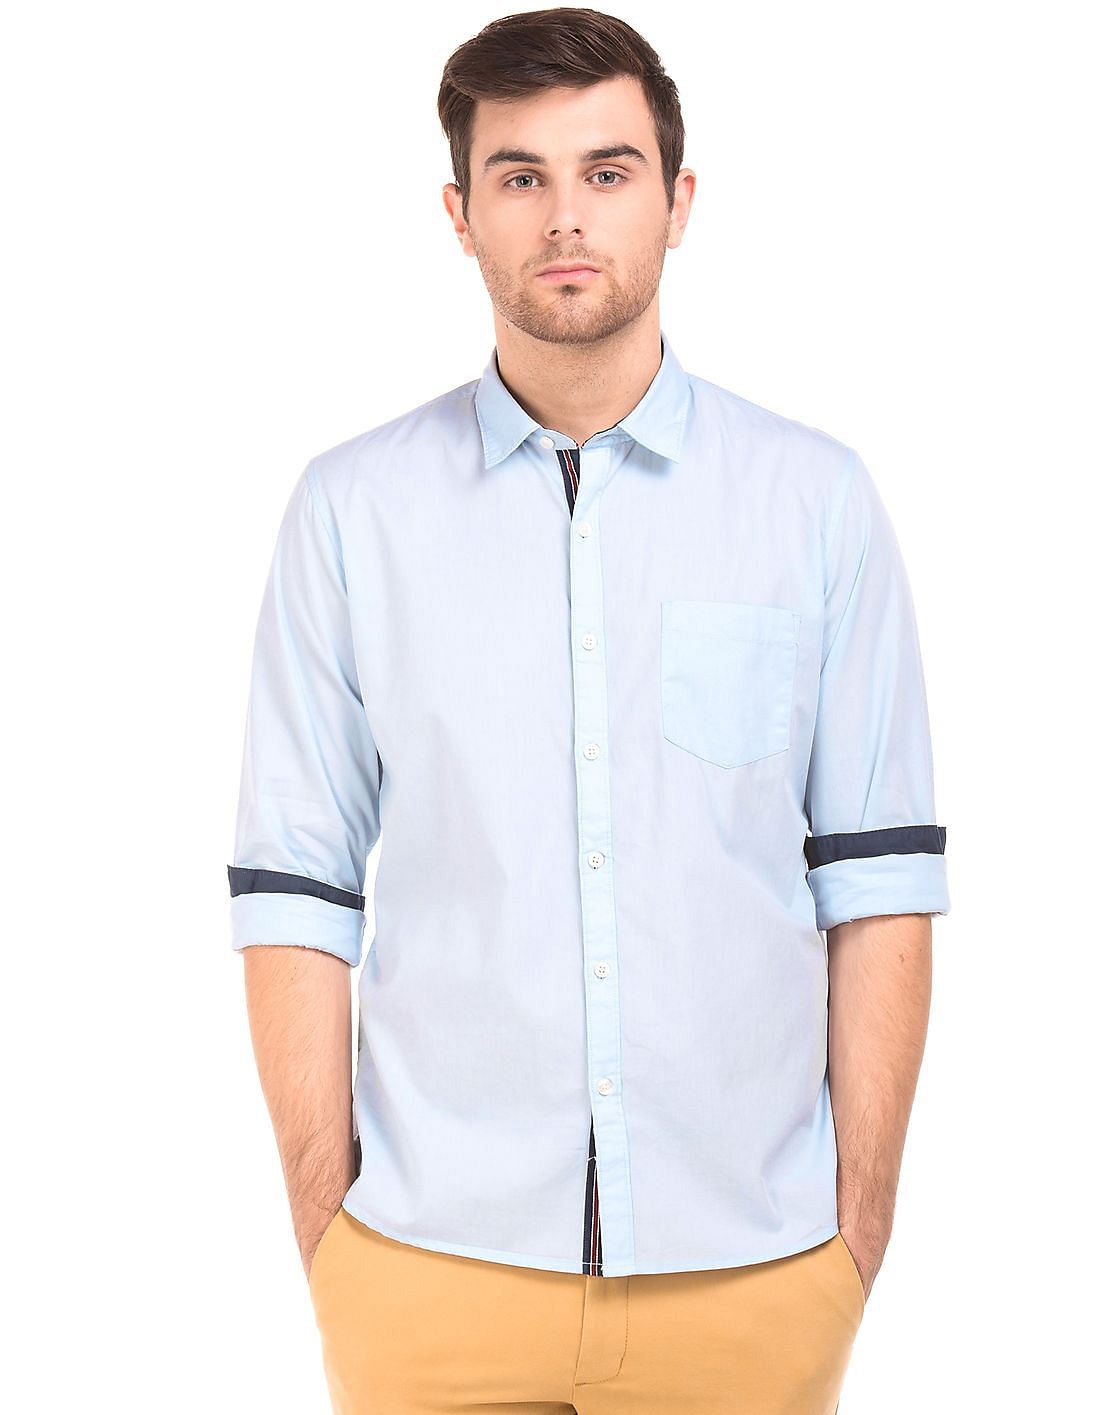 70% Off on Men’s Fit Shirt Starts from Rs. 210